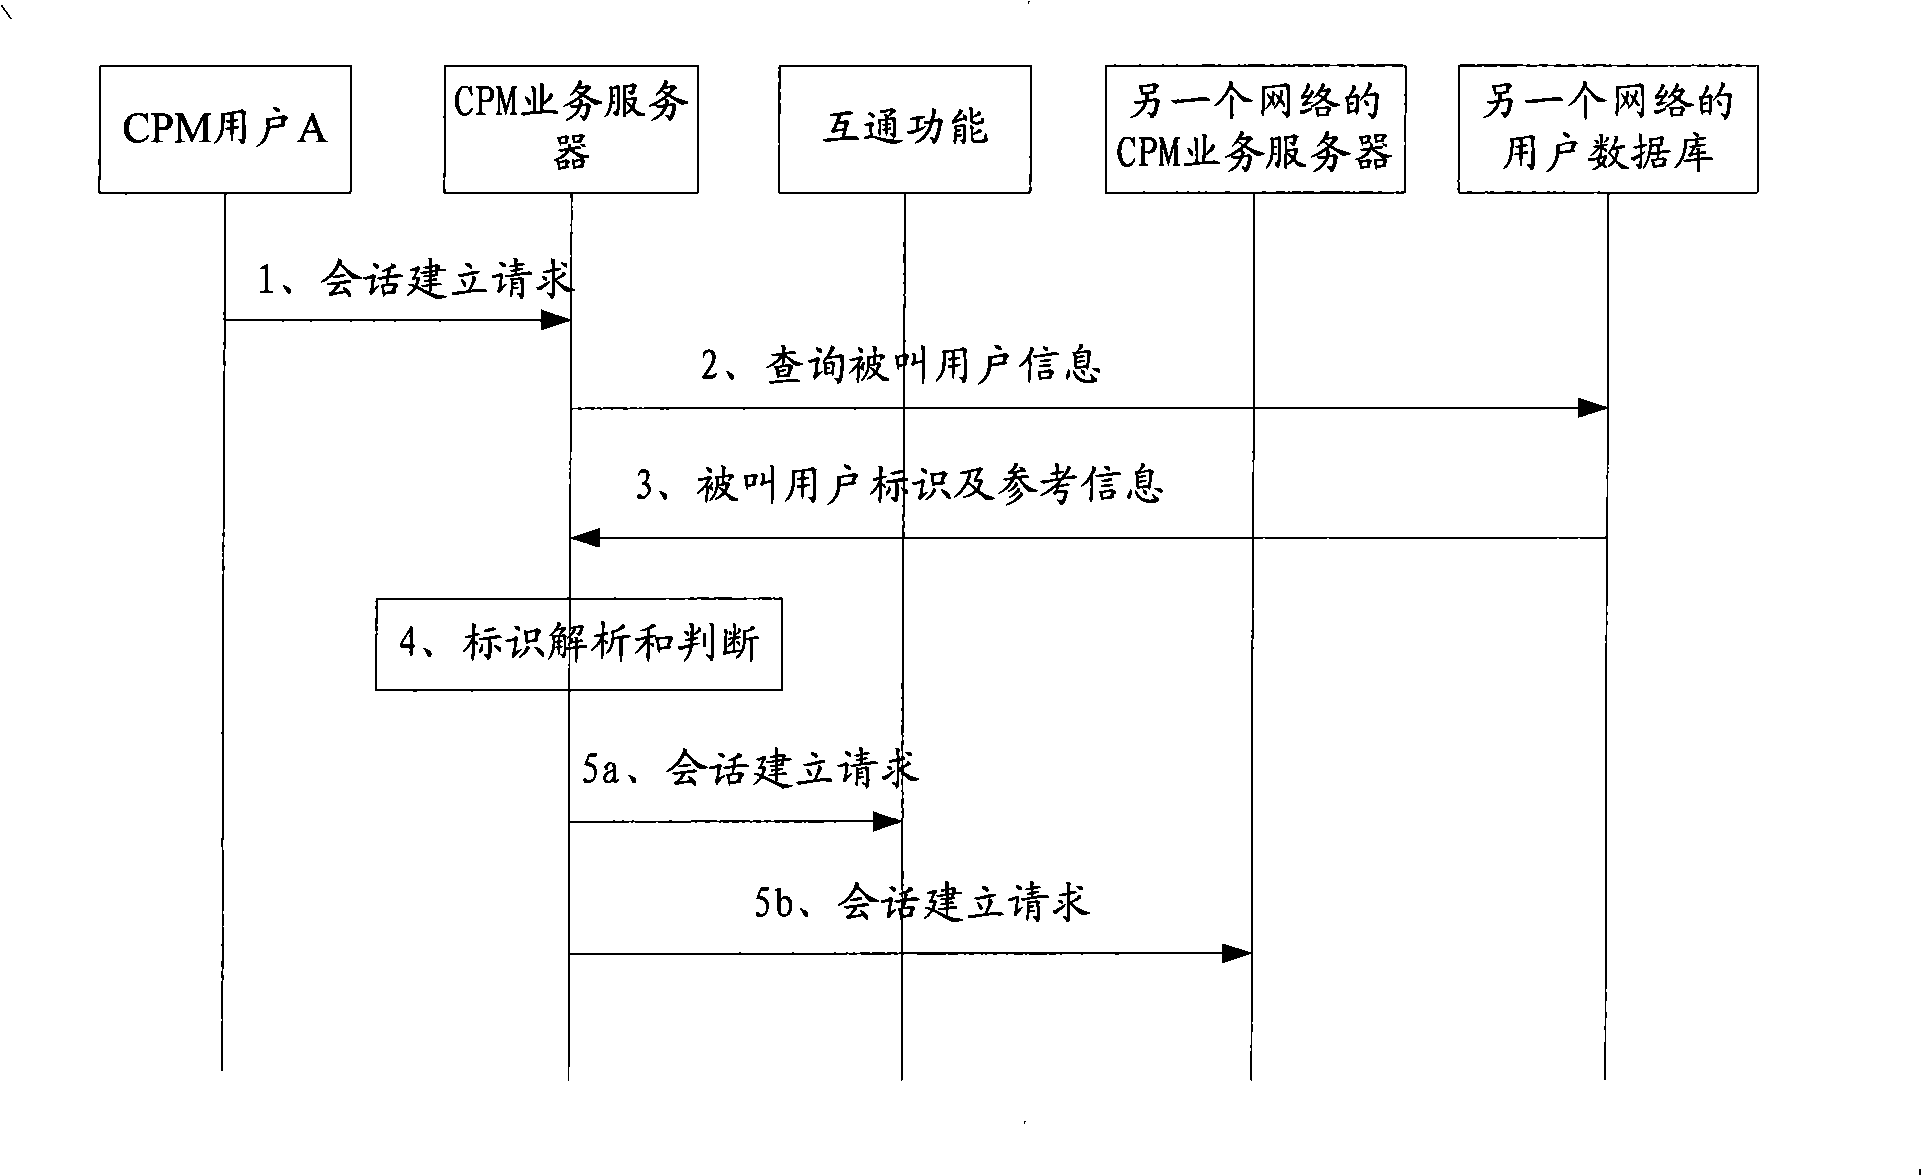 Method and system for communicating with customer supporting multiple message services